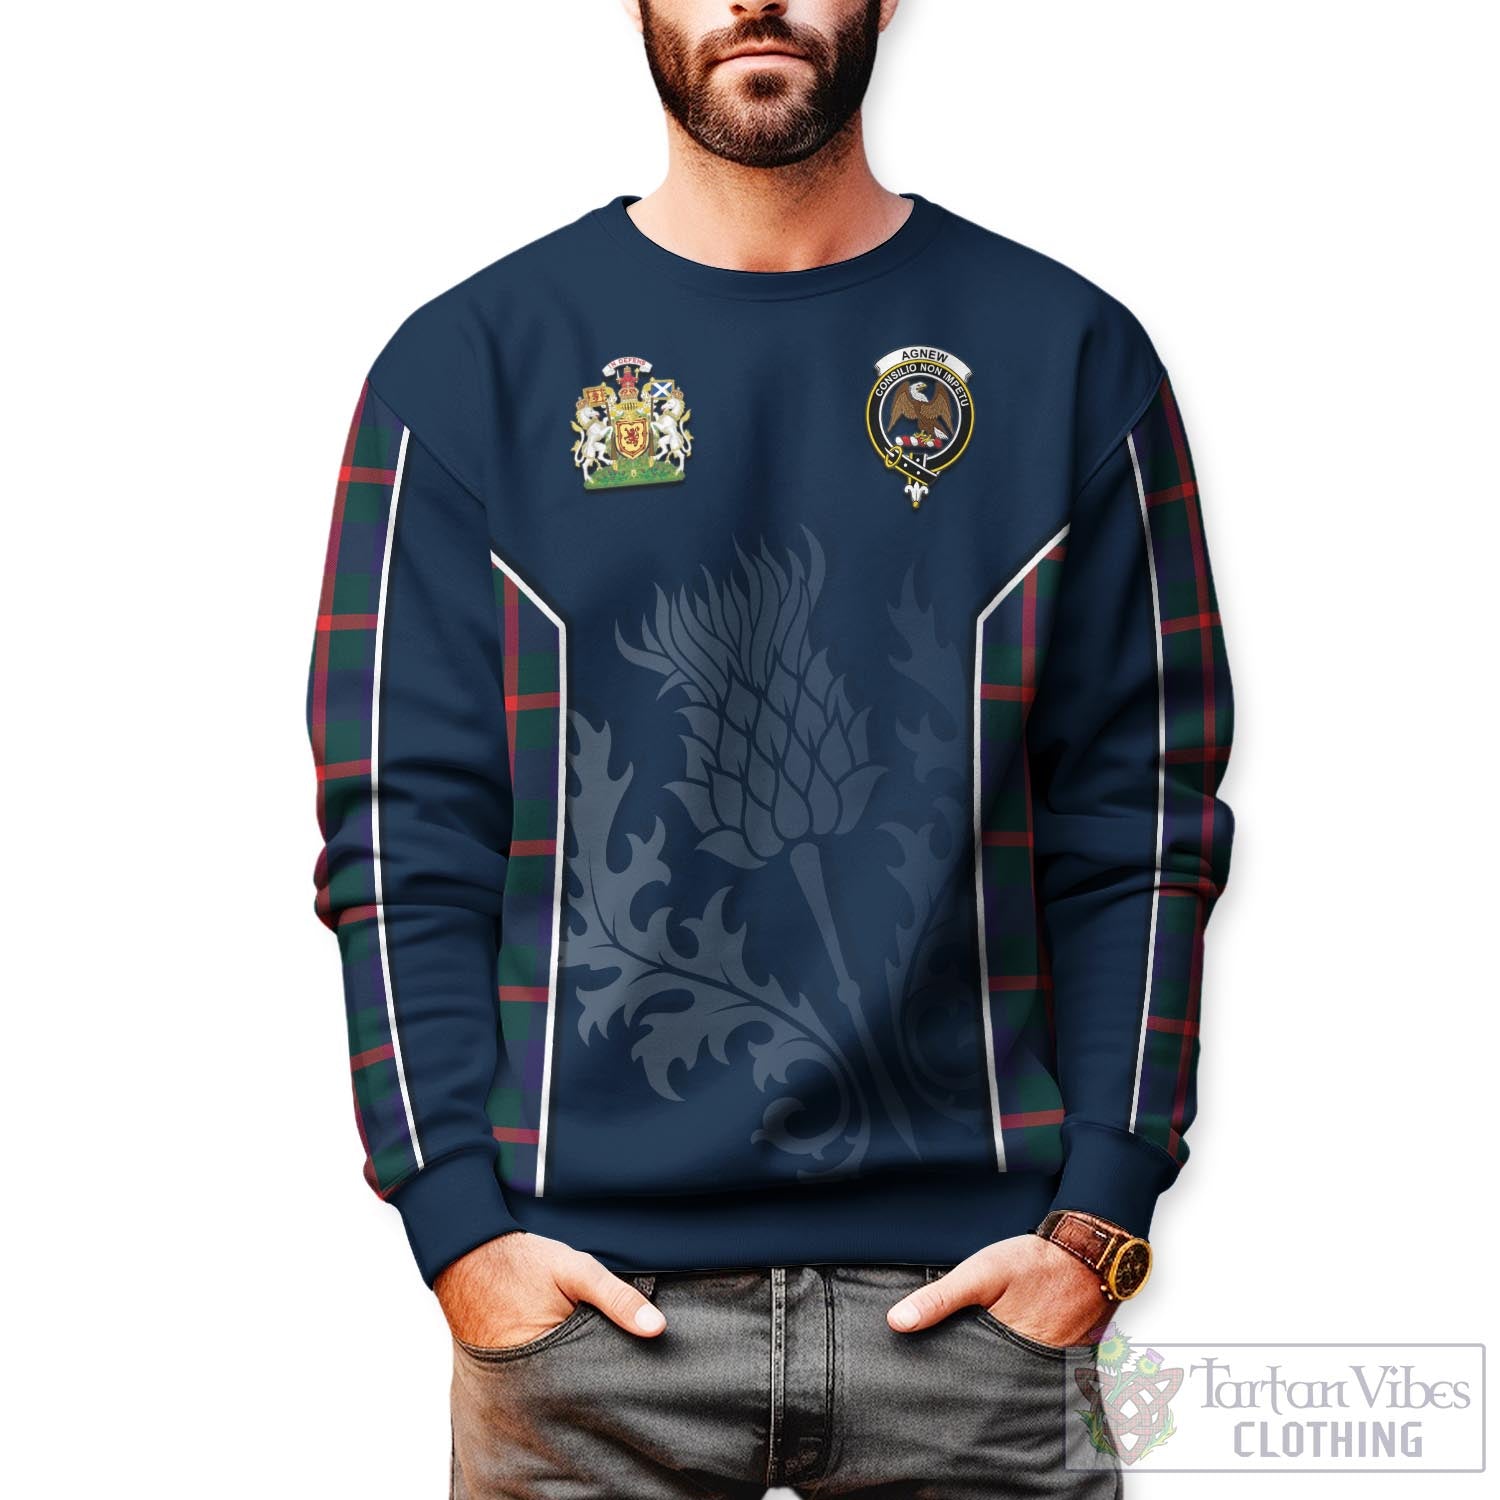 Tartan Vibes Clothing Agnew Modern Tartan Sweatshirt with Family Crest and Scottish Thistle Vibes Sport Style